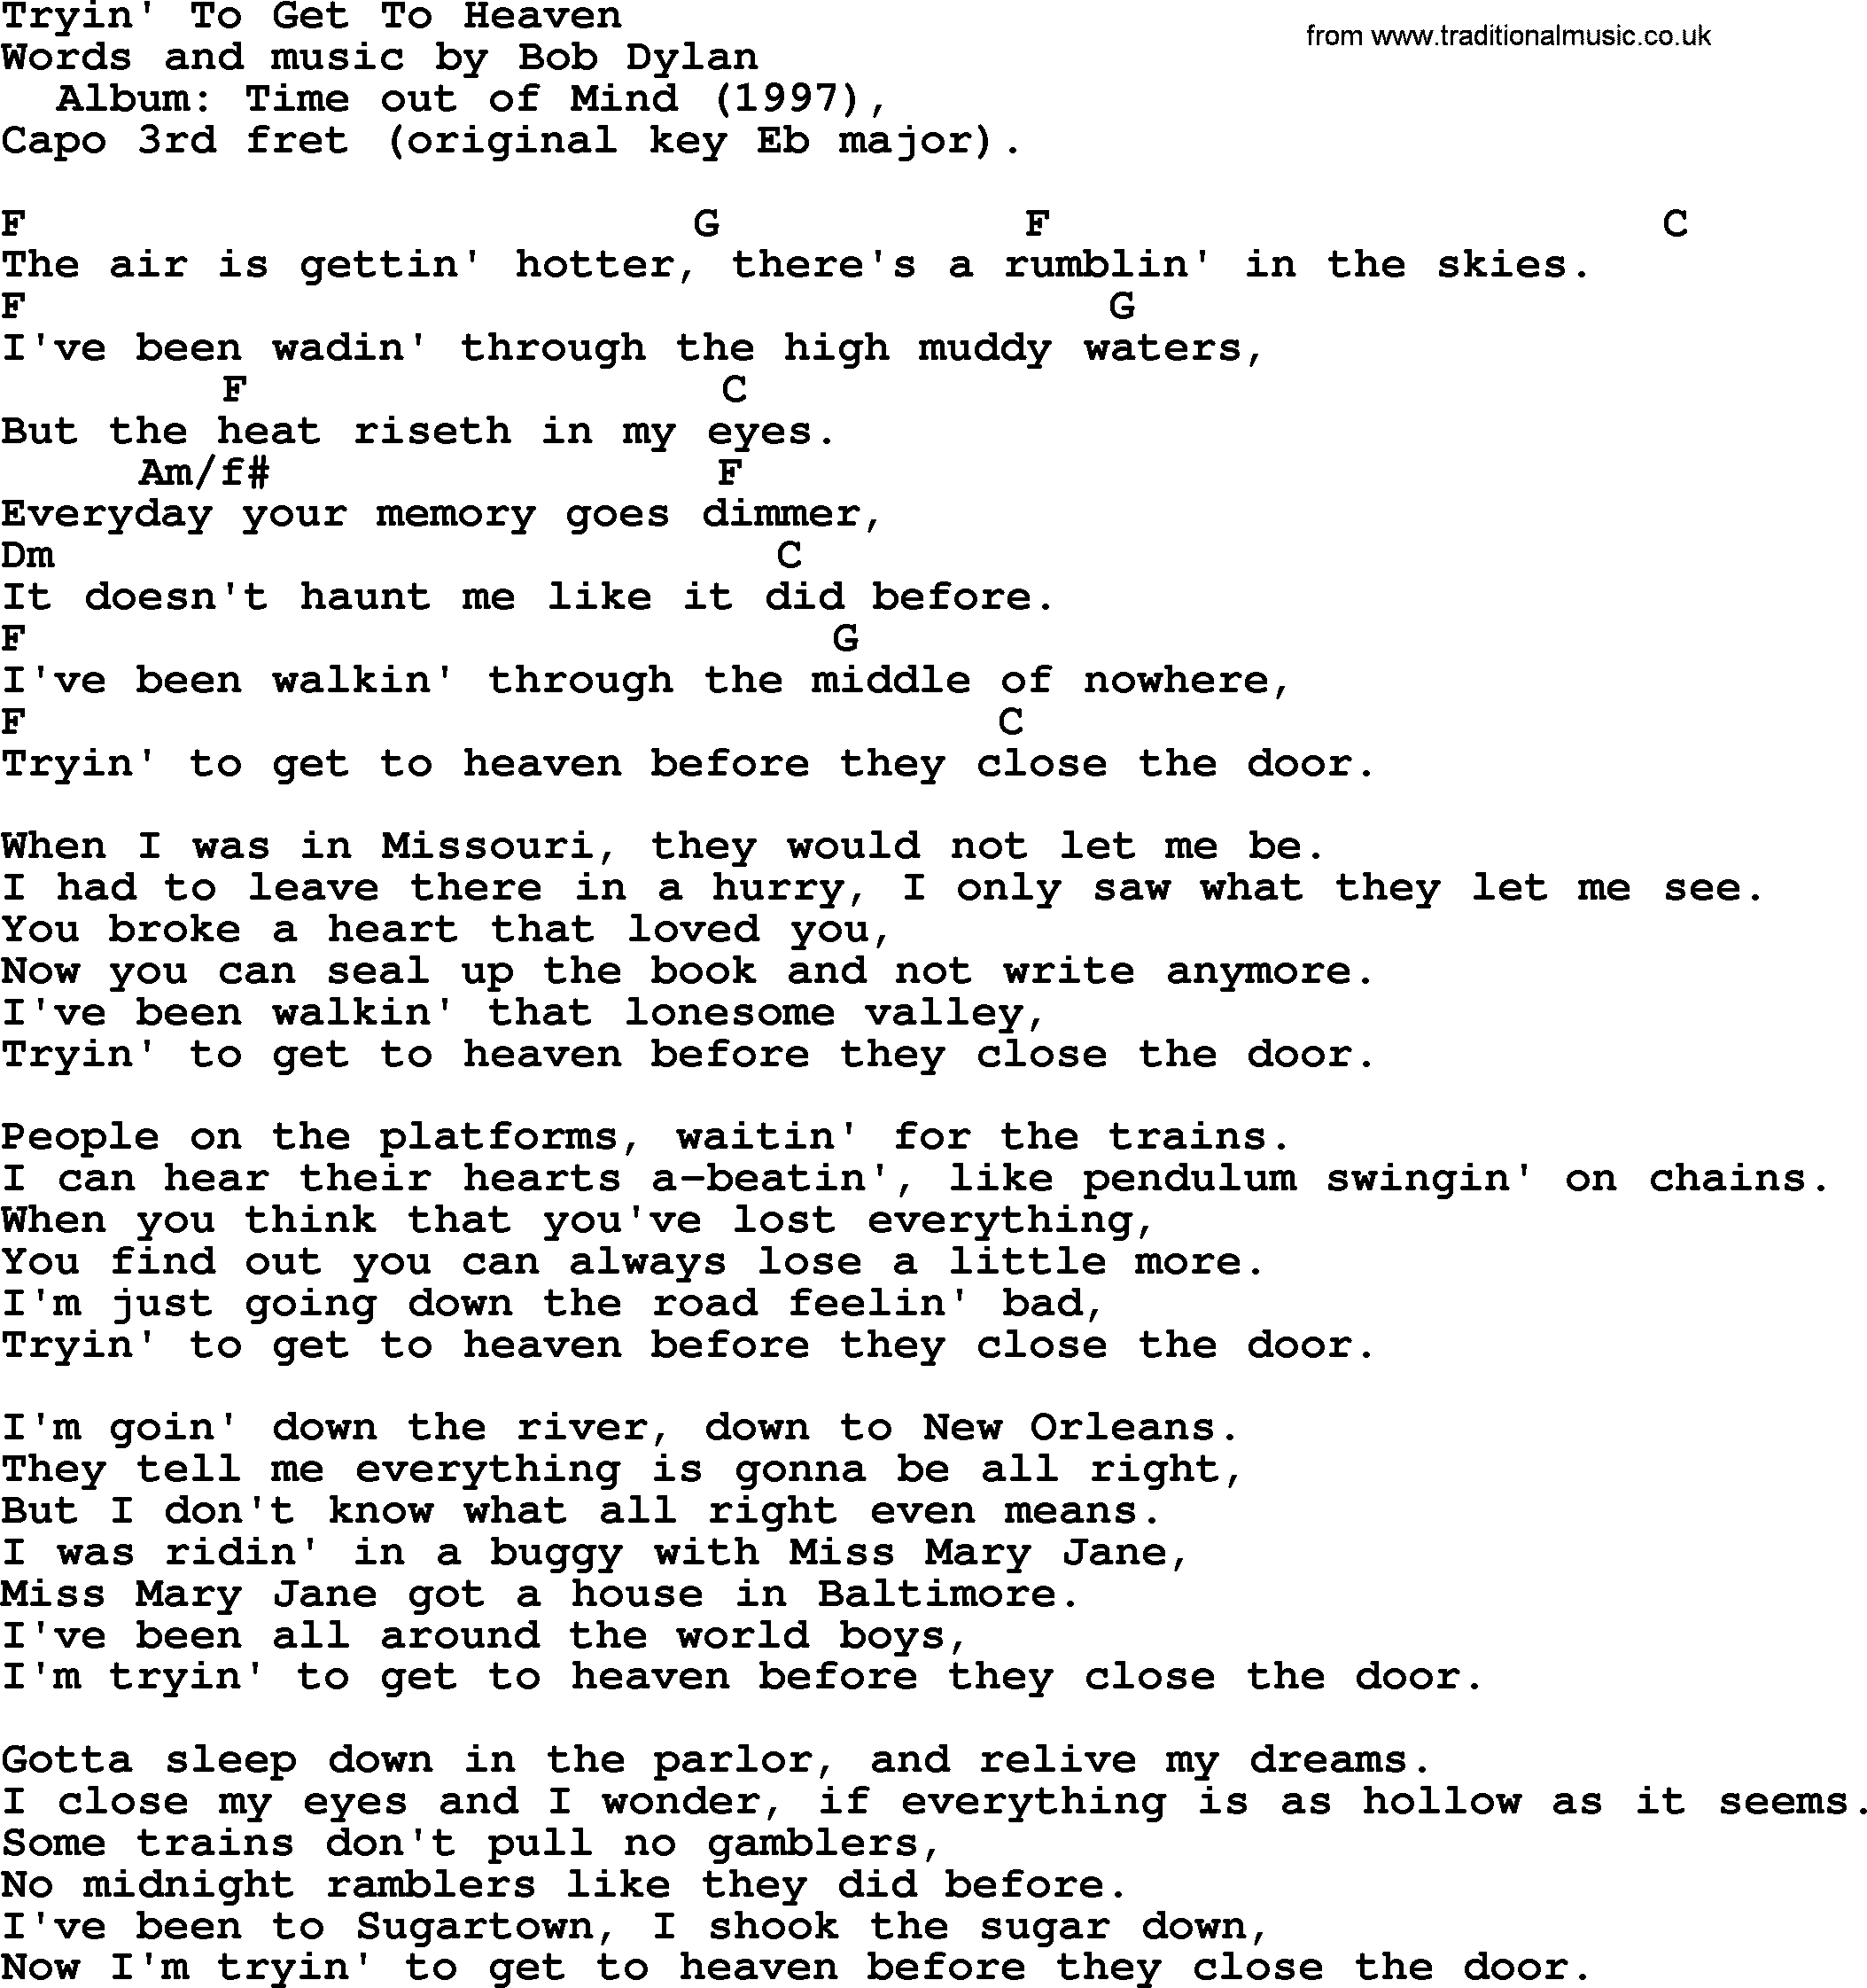 Bob Dylan song, lyrics with chords - Tryin' To Get To Heaven